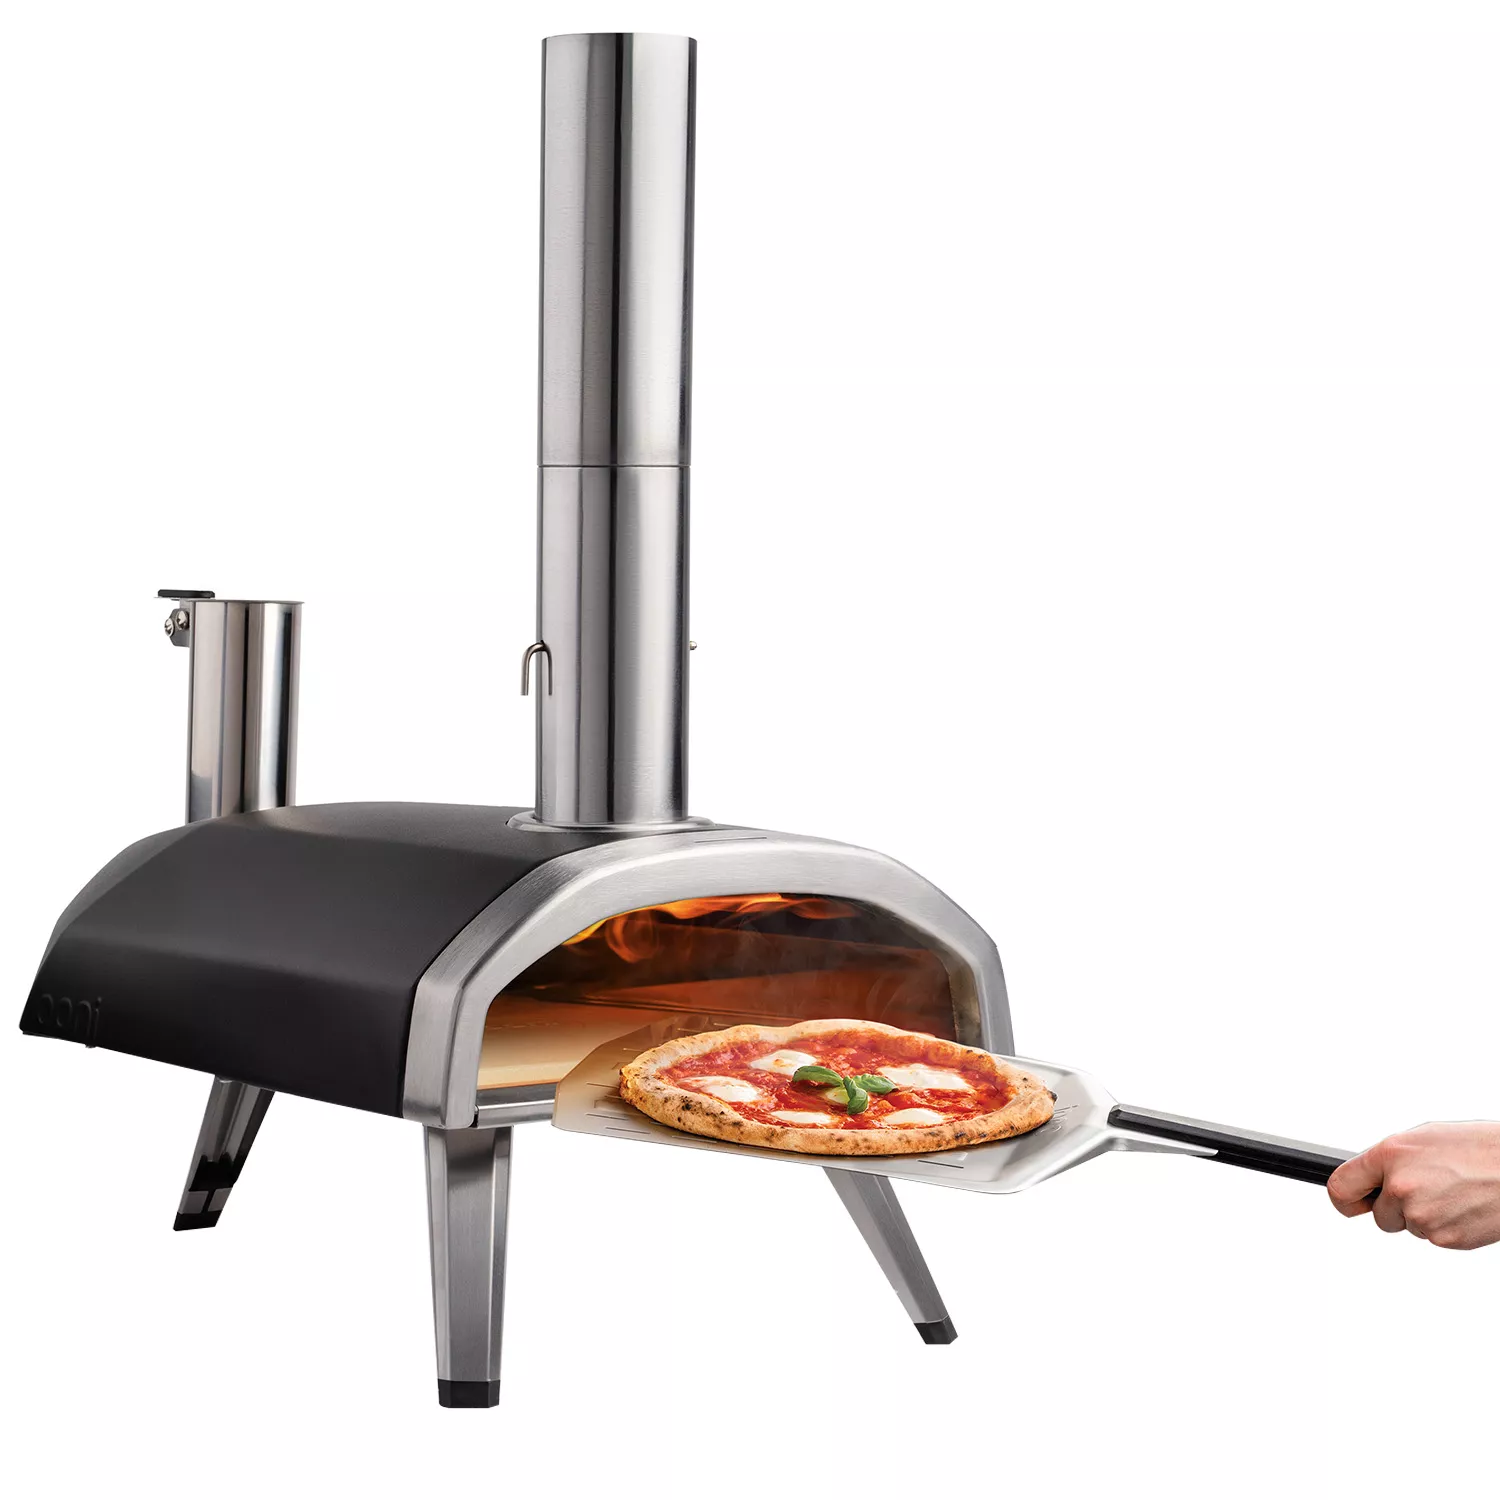 Pizza Oven Brush  Buy a Cost-Effective Pizza Oven Brush Online at